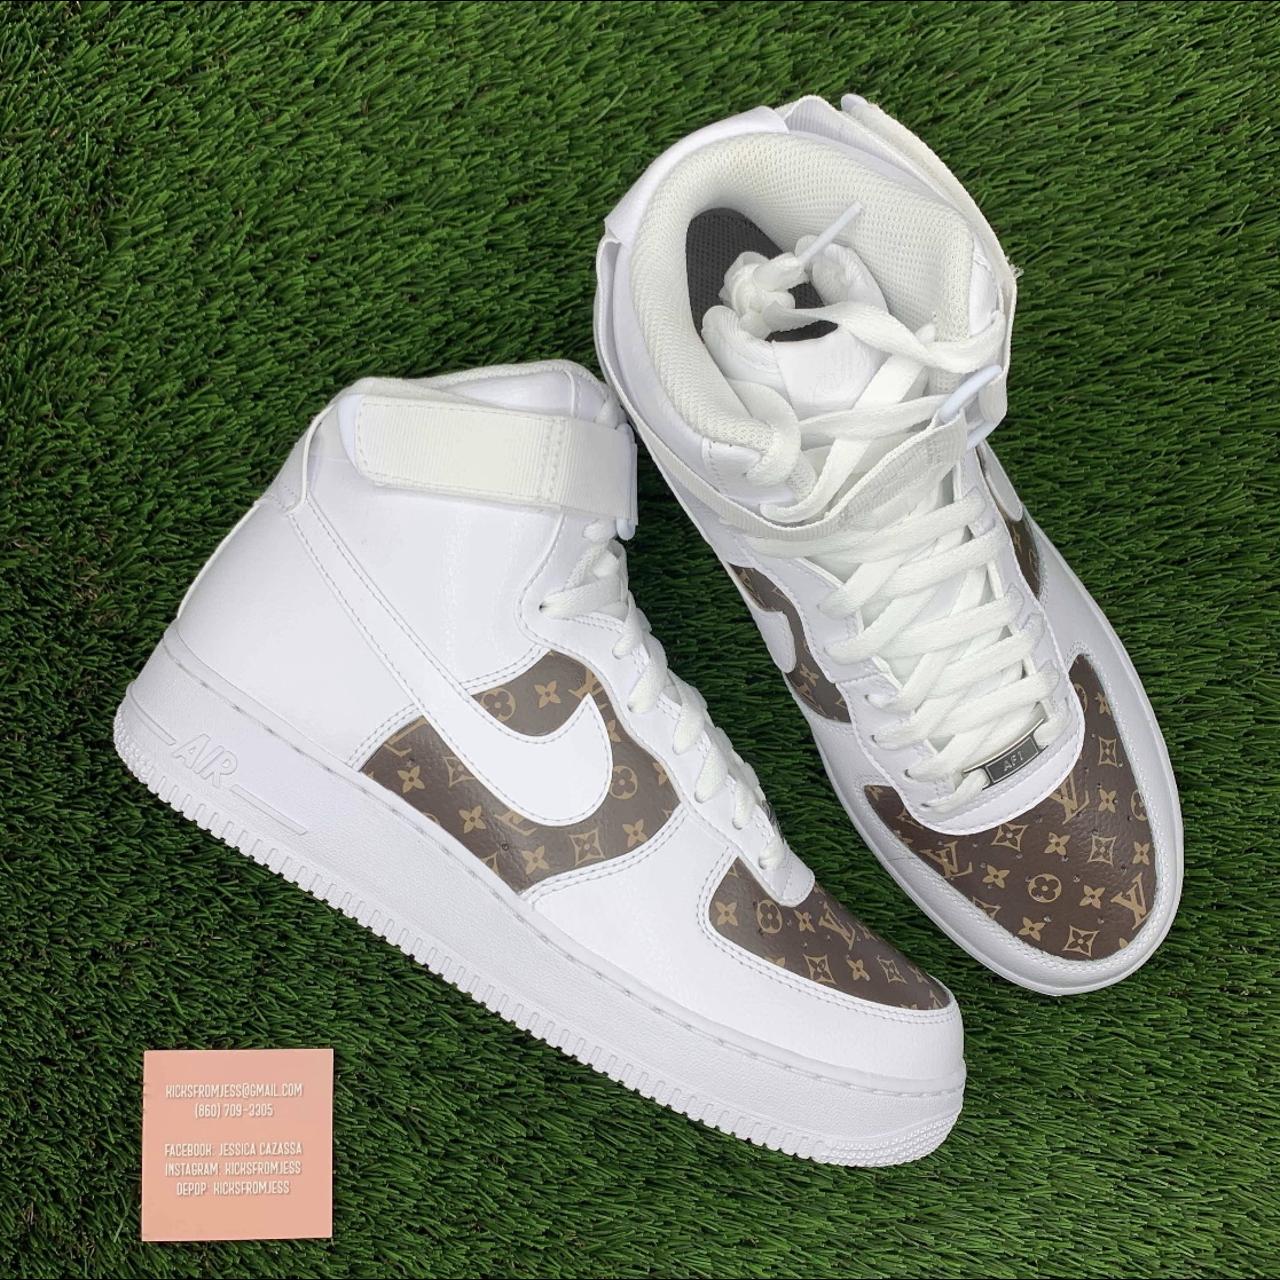 Louis vuitton Airforce 1 from kickzlucas ( see trusted sellers list ) :  r/repcitykickz